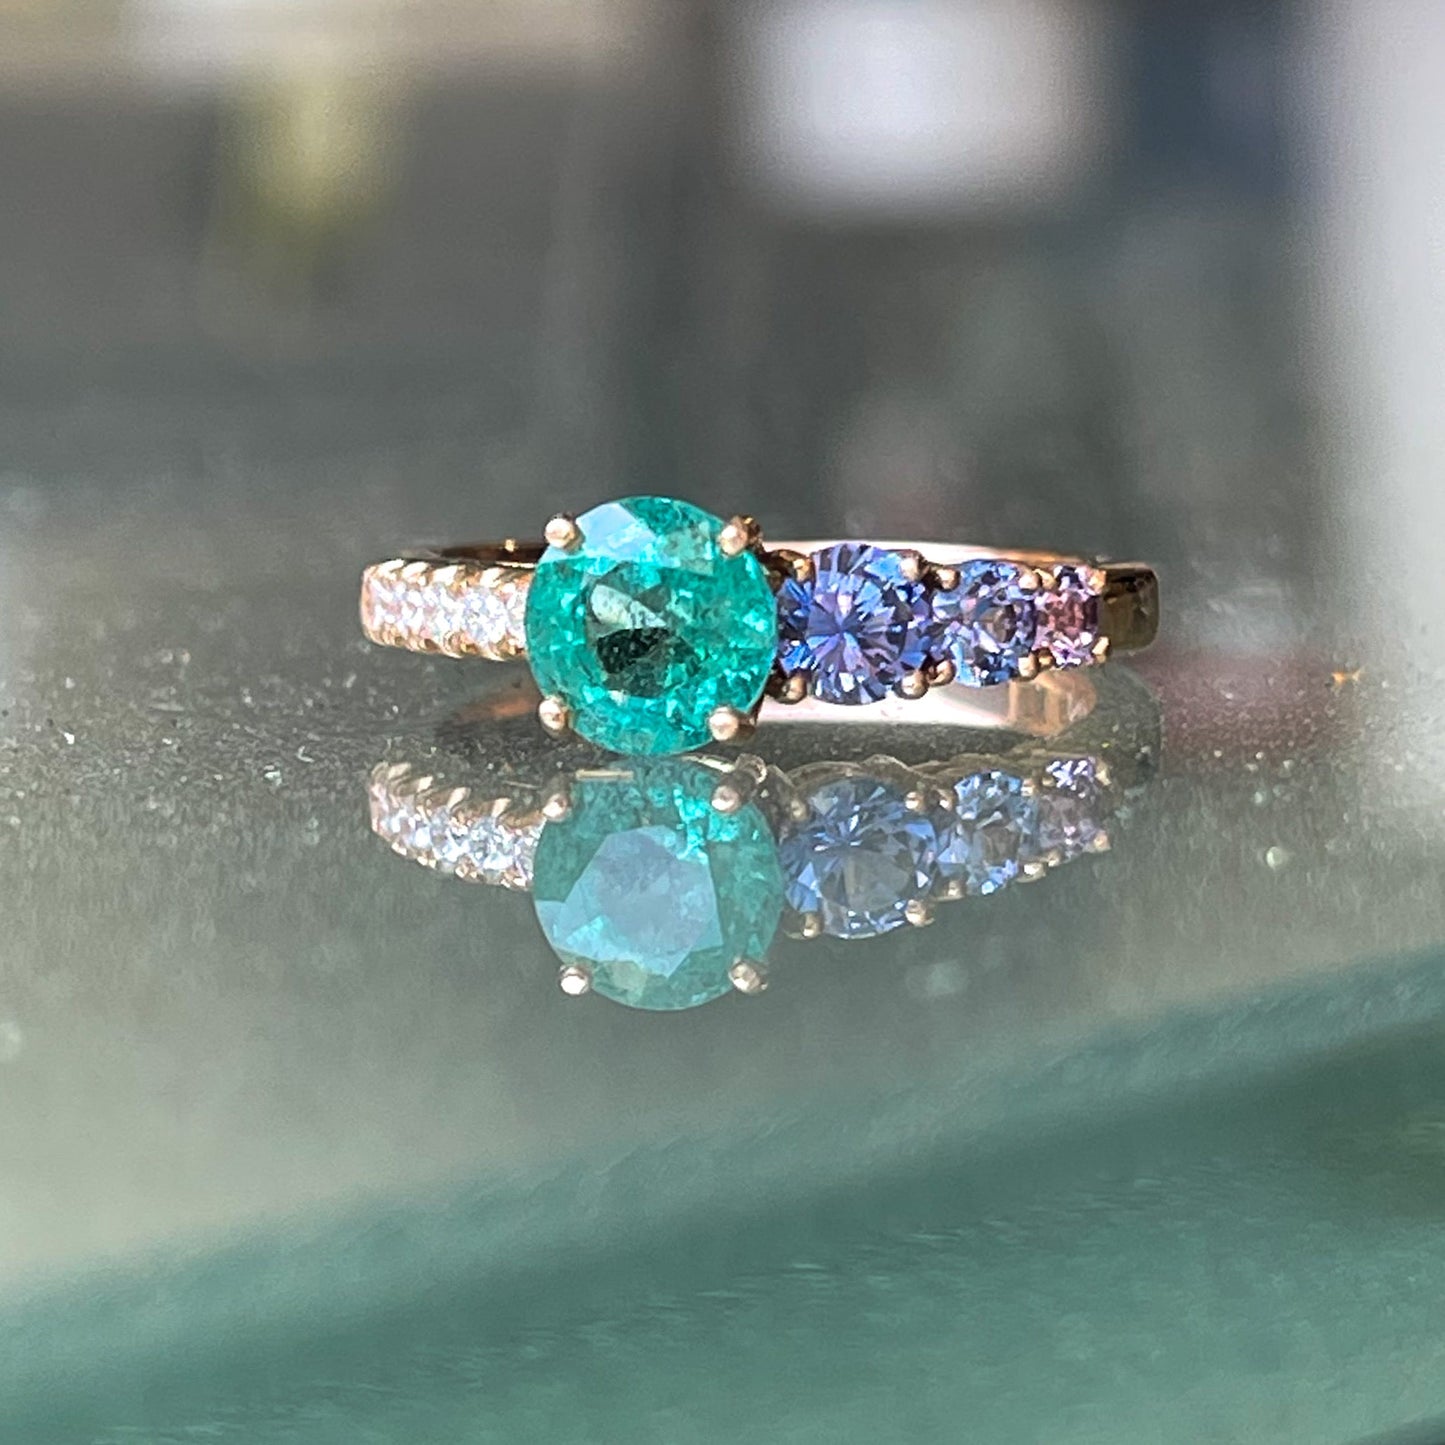 A Colombian Emerald Ring by NIXIN Jewelry rests upon a glass table. The modern emerald ring design features pave diamonds and purple sapphires flanking the green emerald.